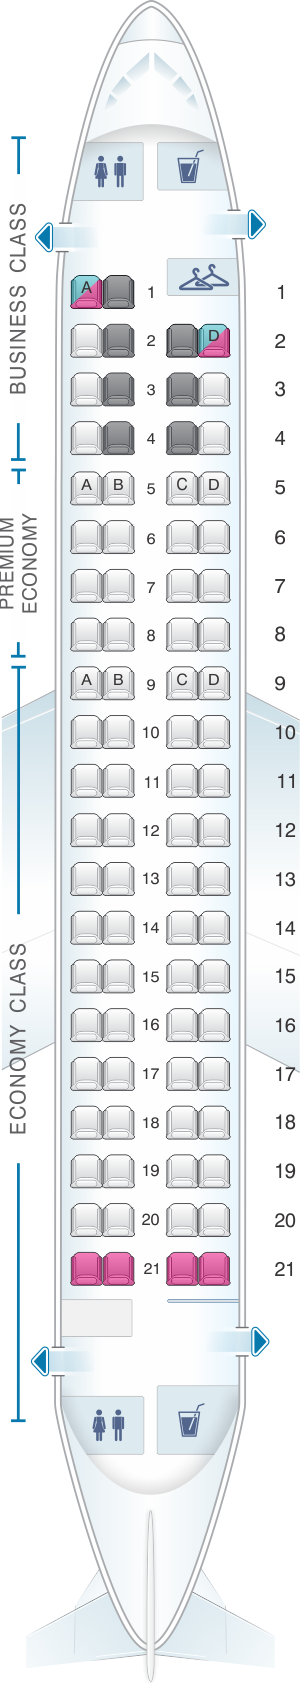 Embraer Erj 175 Seat Map Delta Awesome Home